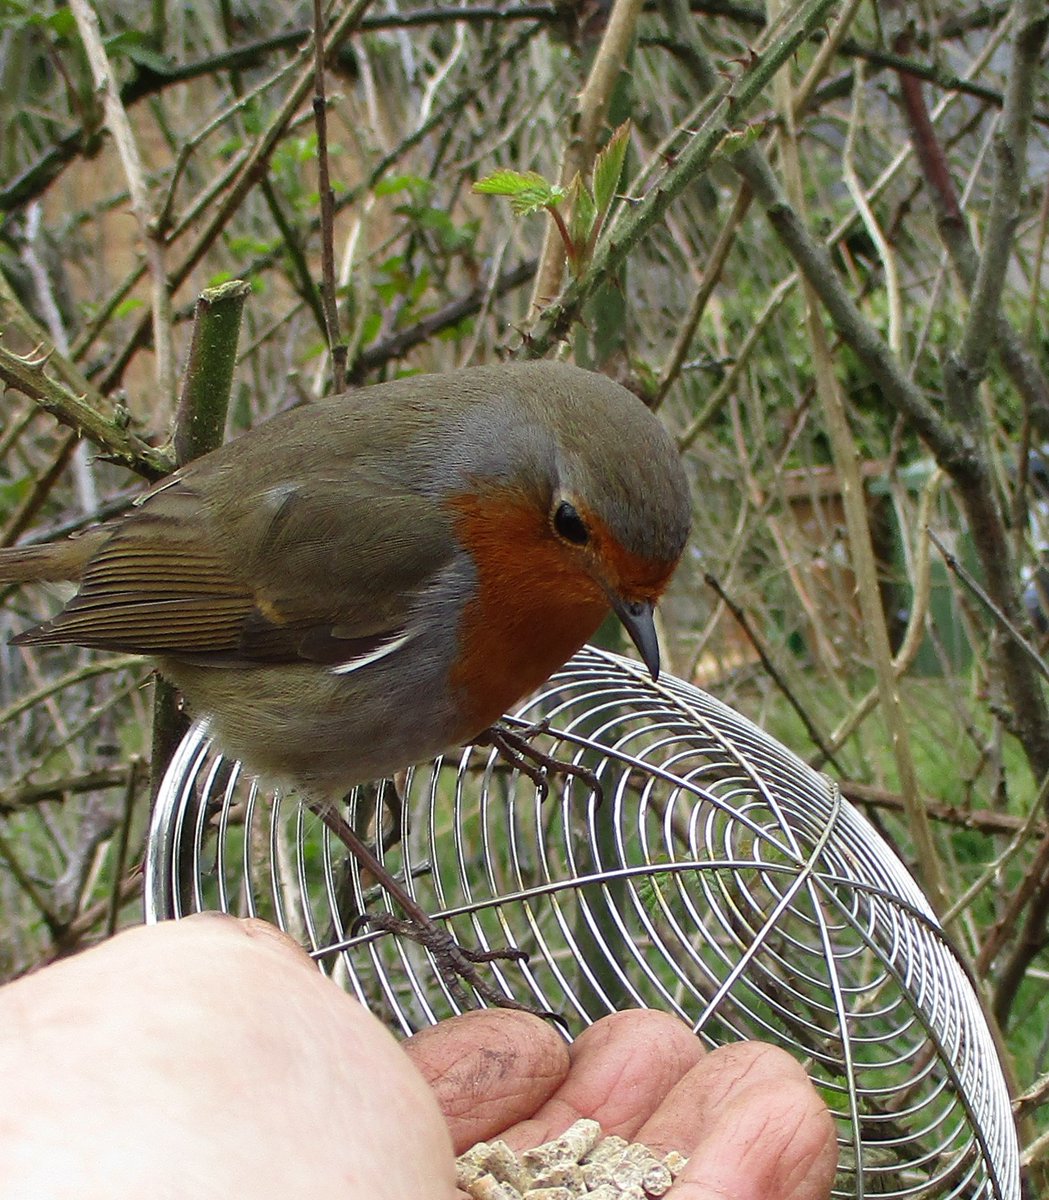  #RobinWatchAfter giving me an affronted look which clearly said "How DARE you - what about ME?" - he finally consented to eat his breakfast off my hand. (It's a good job he didn't know that strainer was once used for frying chicken joints!)